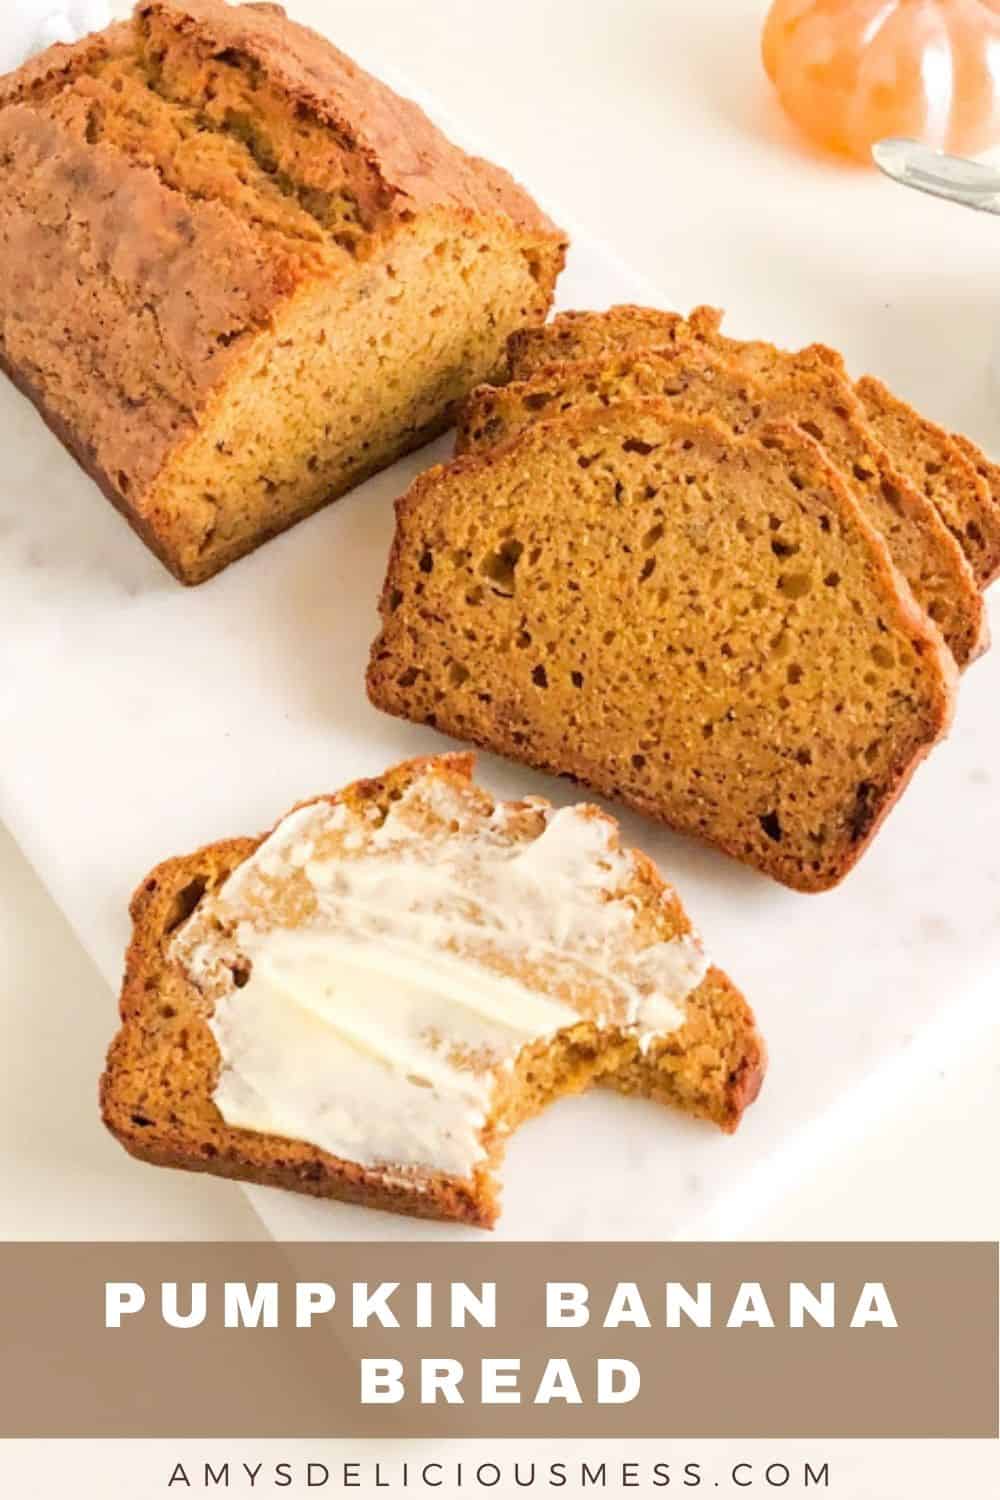 loaf of pumpkin banana bread with slices and buttered slice with bite taken out on marble cutting board. Next to small round white ramekin of butter with silver butter knife, with orange glass pumpkin behind.